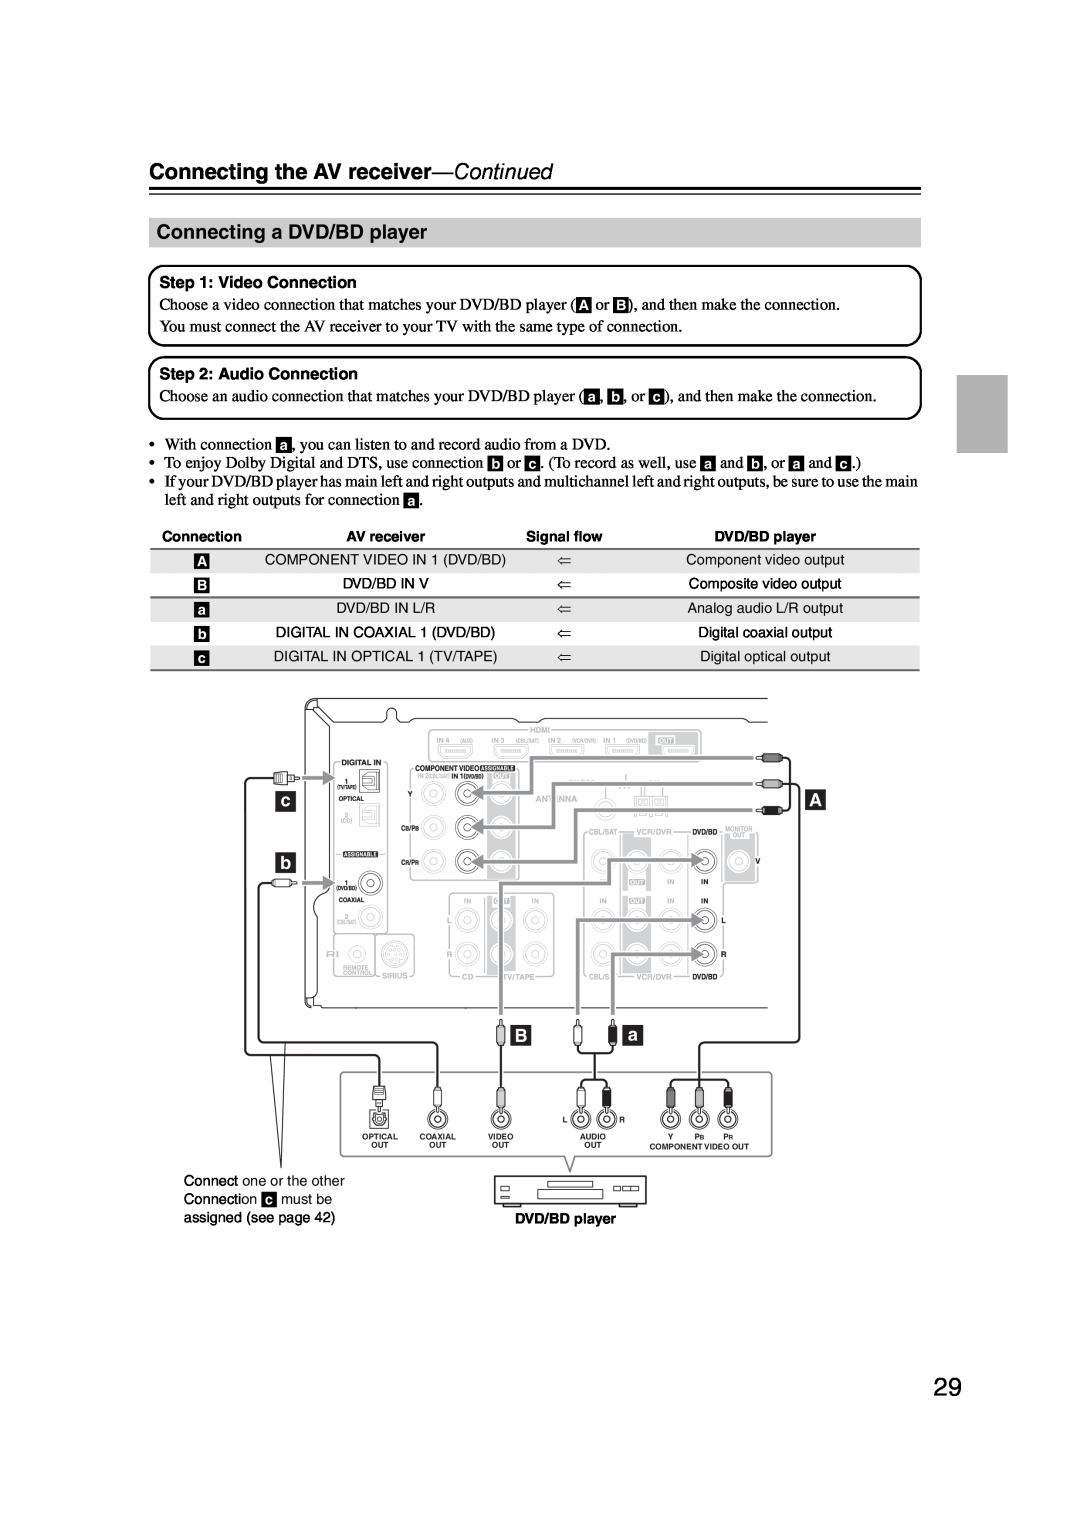 Onkyo 29344934 instruction manual Connecting a DVD/BD player, Connecting the AV receiver—Continued 